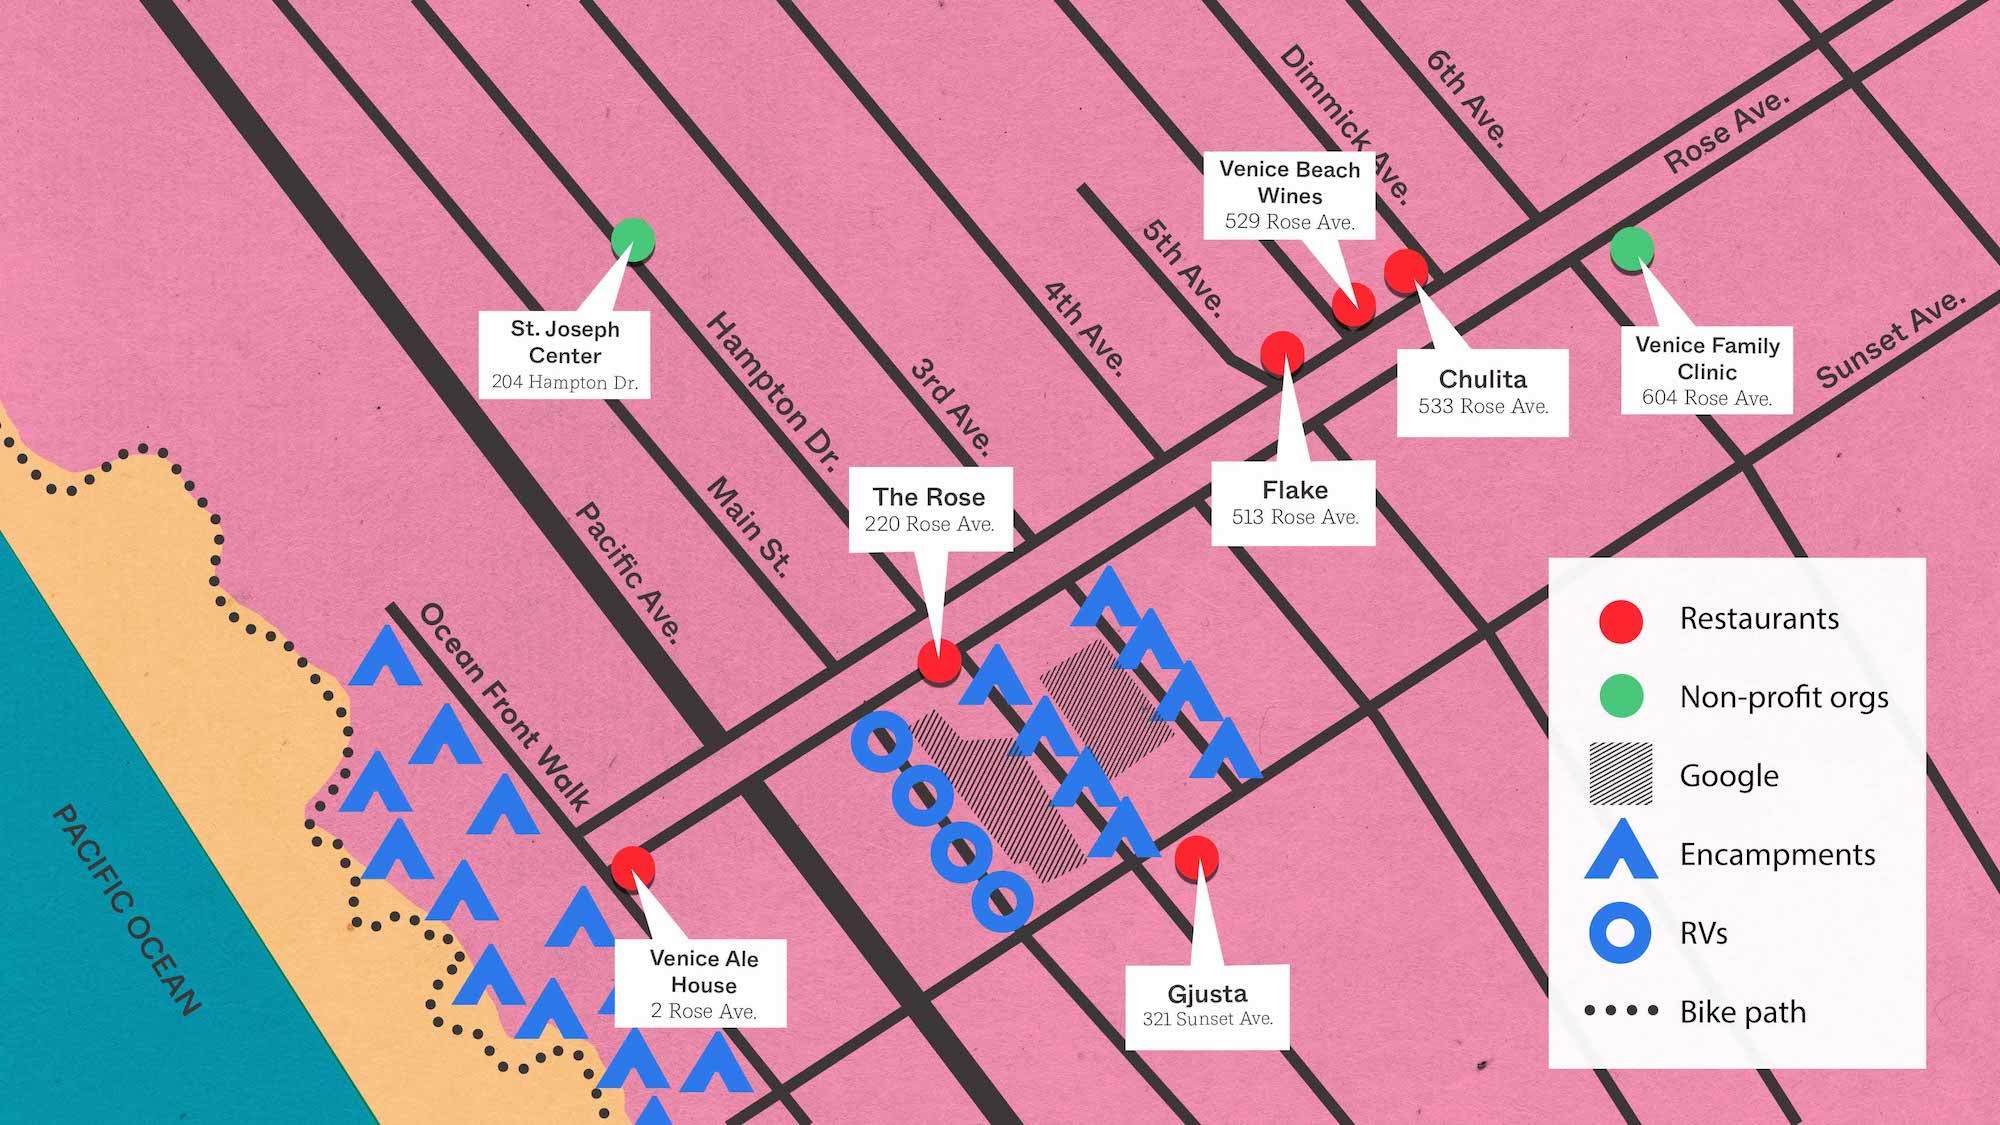 A map of Venice illustrating the various businesses on Rose Ave. December 2021